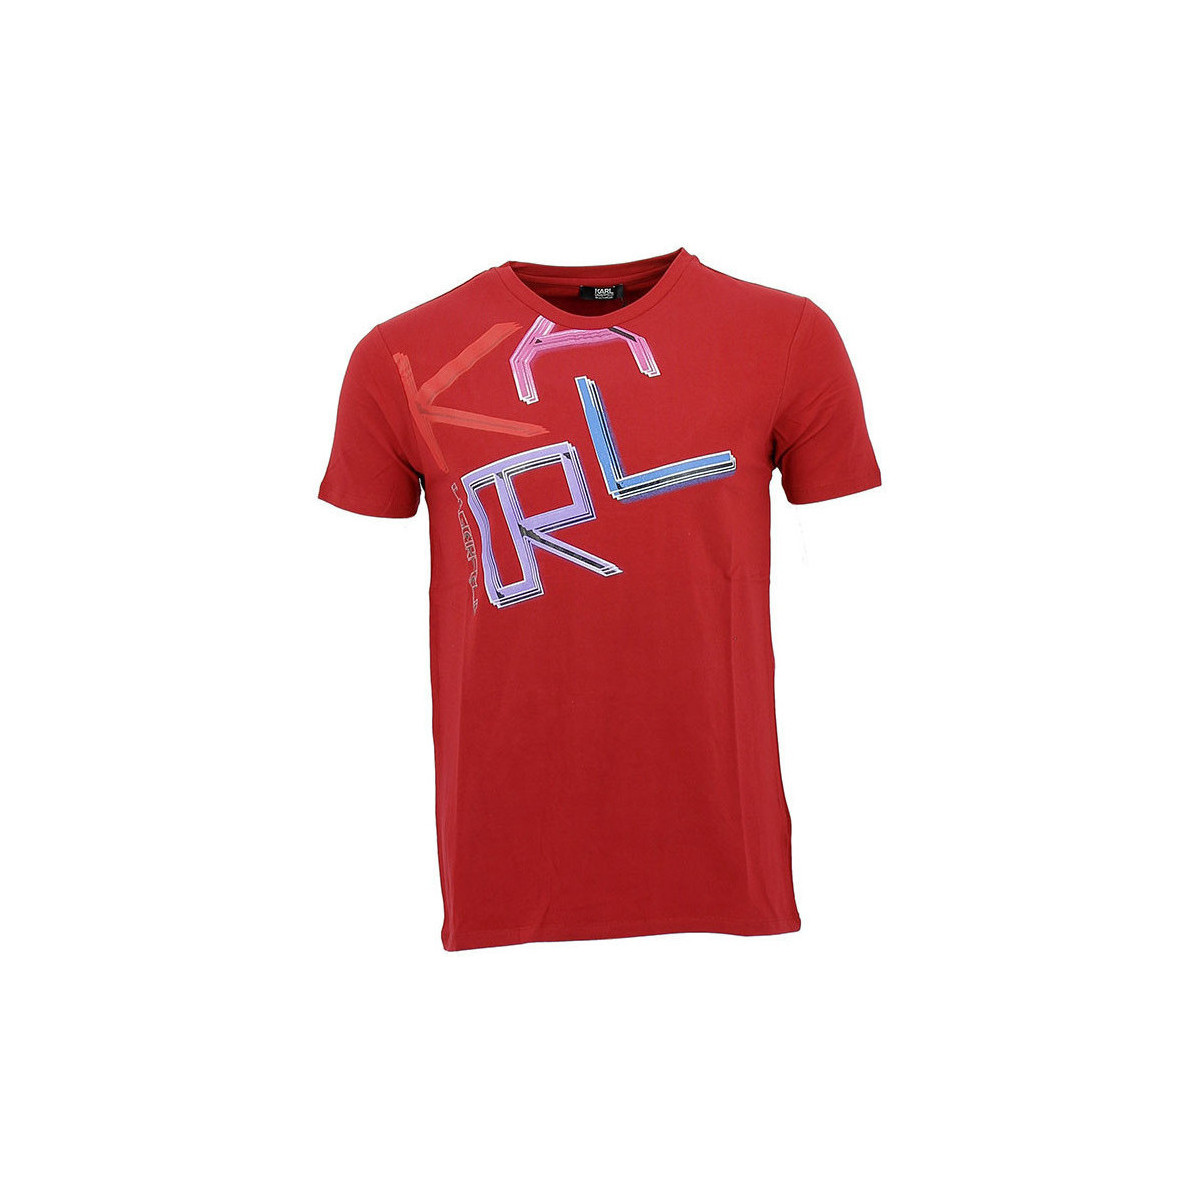 Vêtements Homme T-shirts & Polos Karl Lagerfeld Tee-shirt Rouge